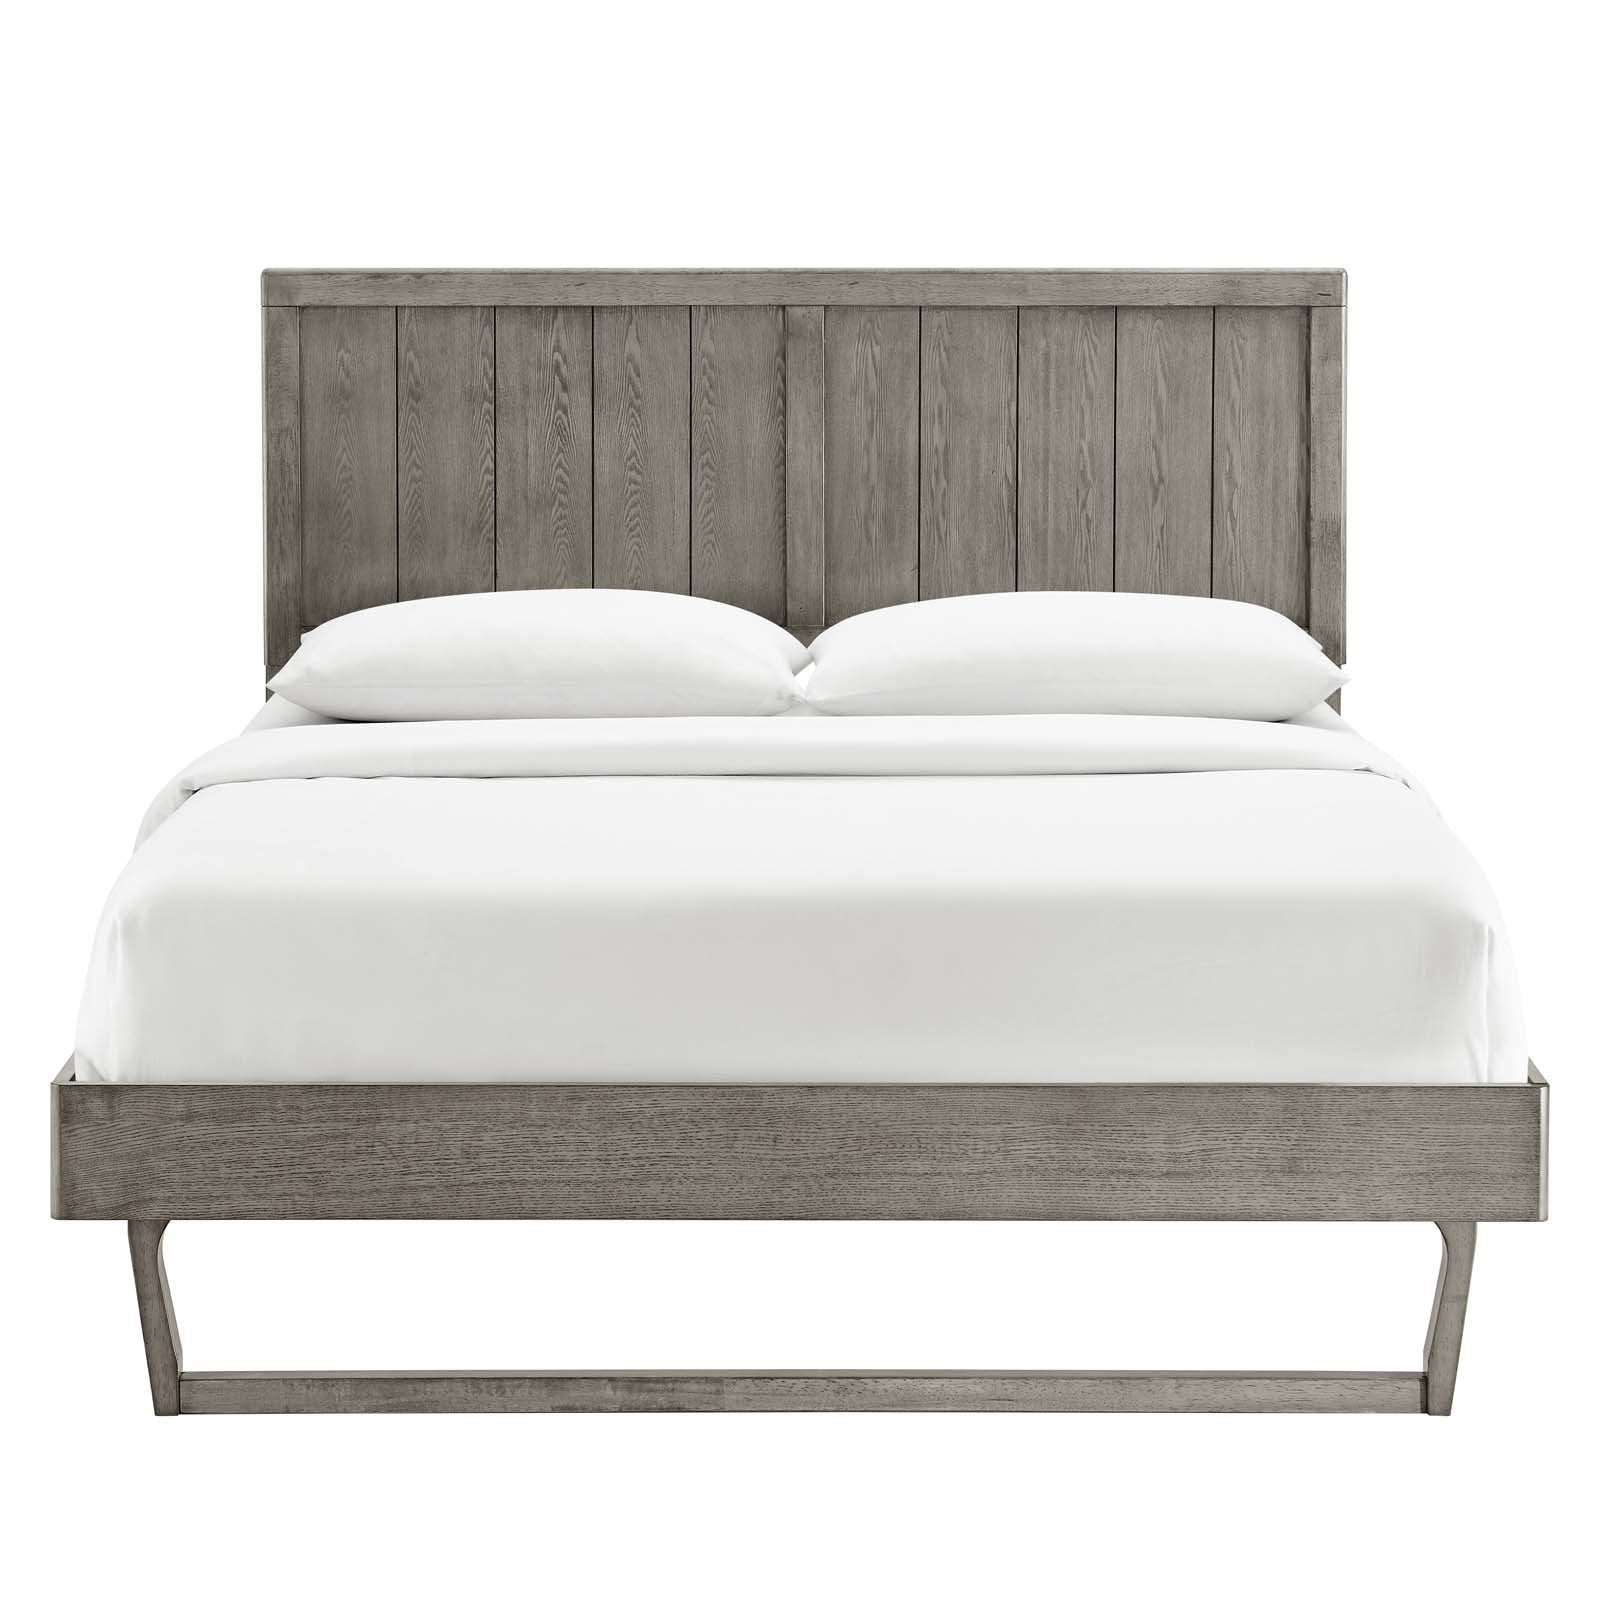 Modway Beds - Alana Queen Wood Platform Bed With Angular Frame Gray